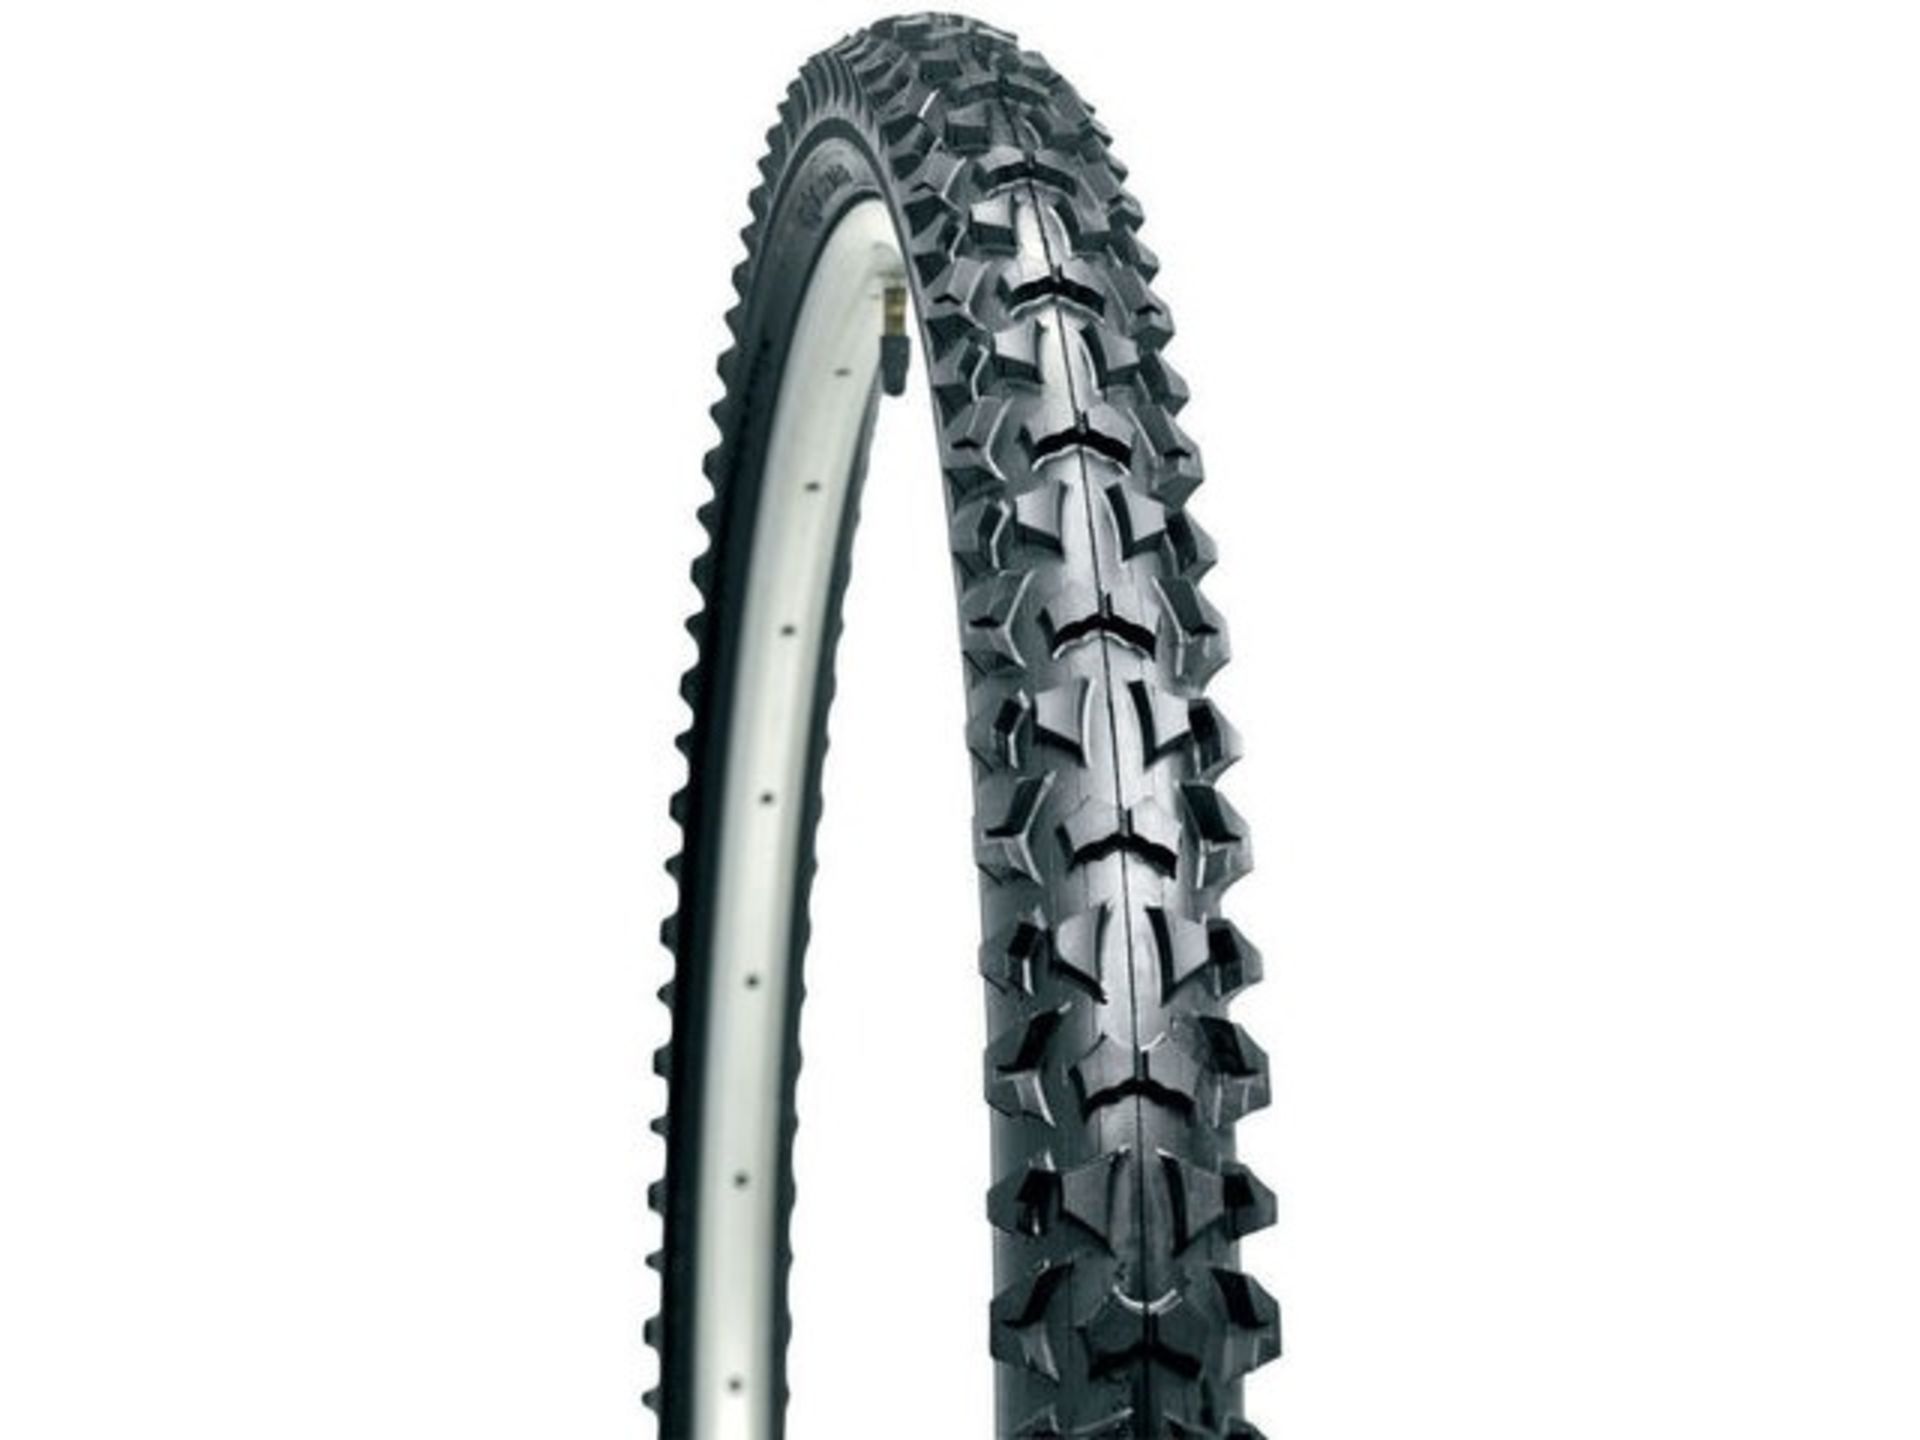 V 26 x 1.95 Raleigh Mountain Bike Tyre X  2  Bid price to be multiplied by Two - Image 2 of 2